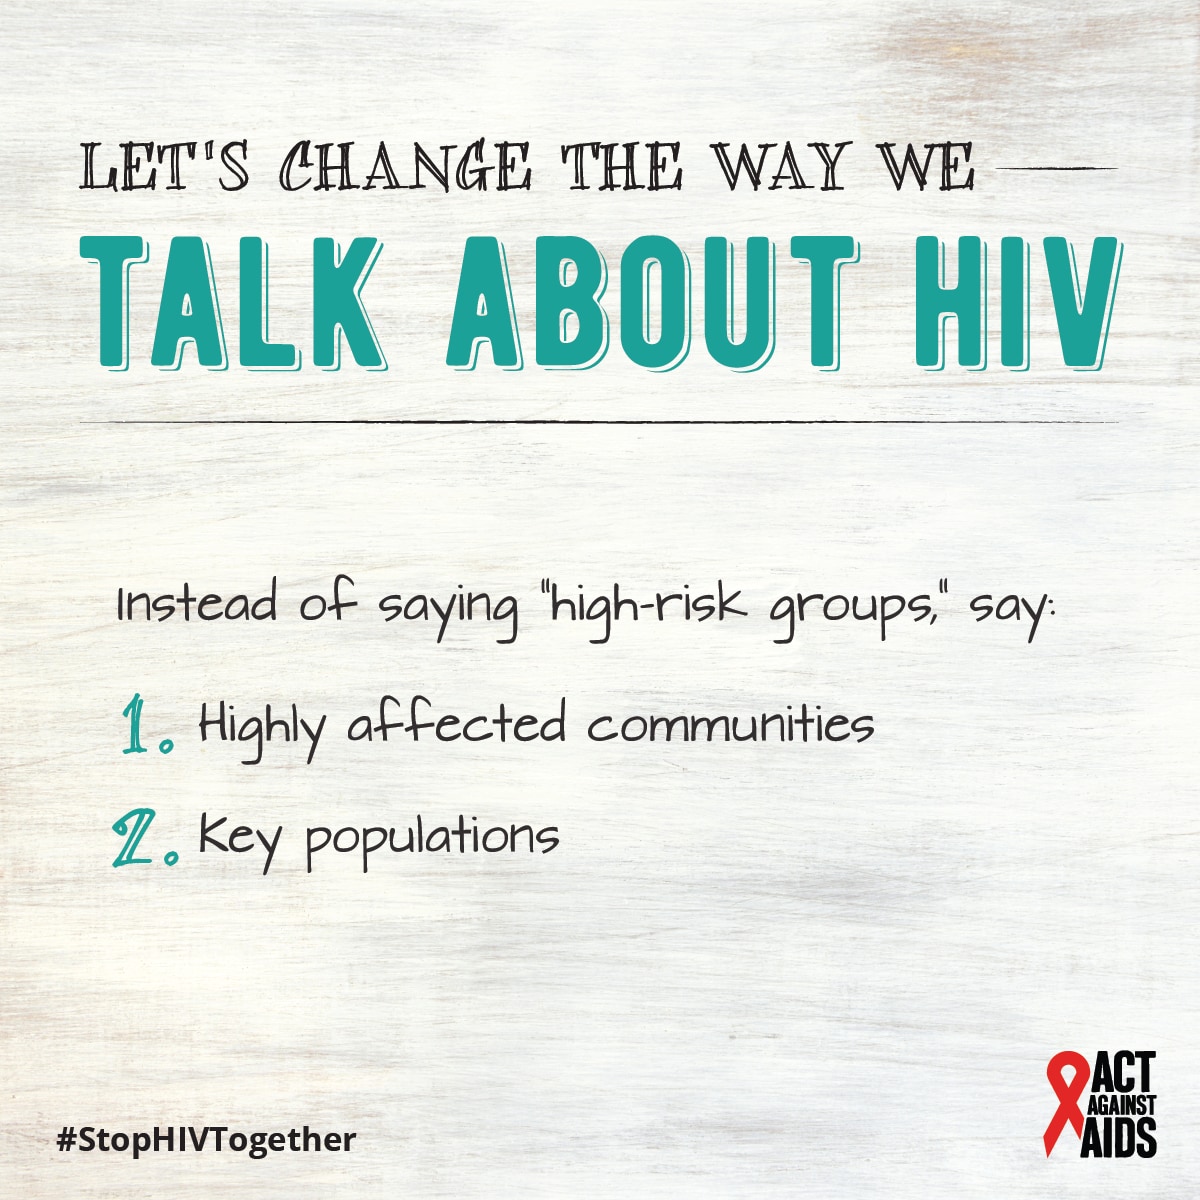 Text: Let’s change the way we talk about HIV. Instead of saying “high-risk groups,” say: 1. Highly affected communities 2. Key populations. #StopHIVTogether Act Against AIDS